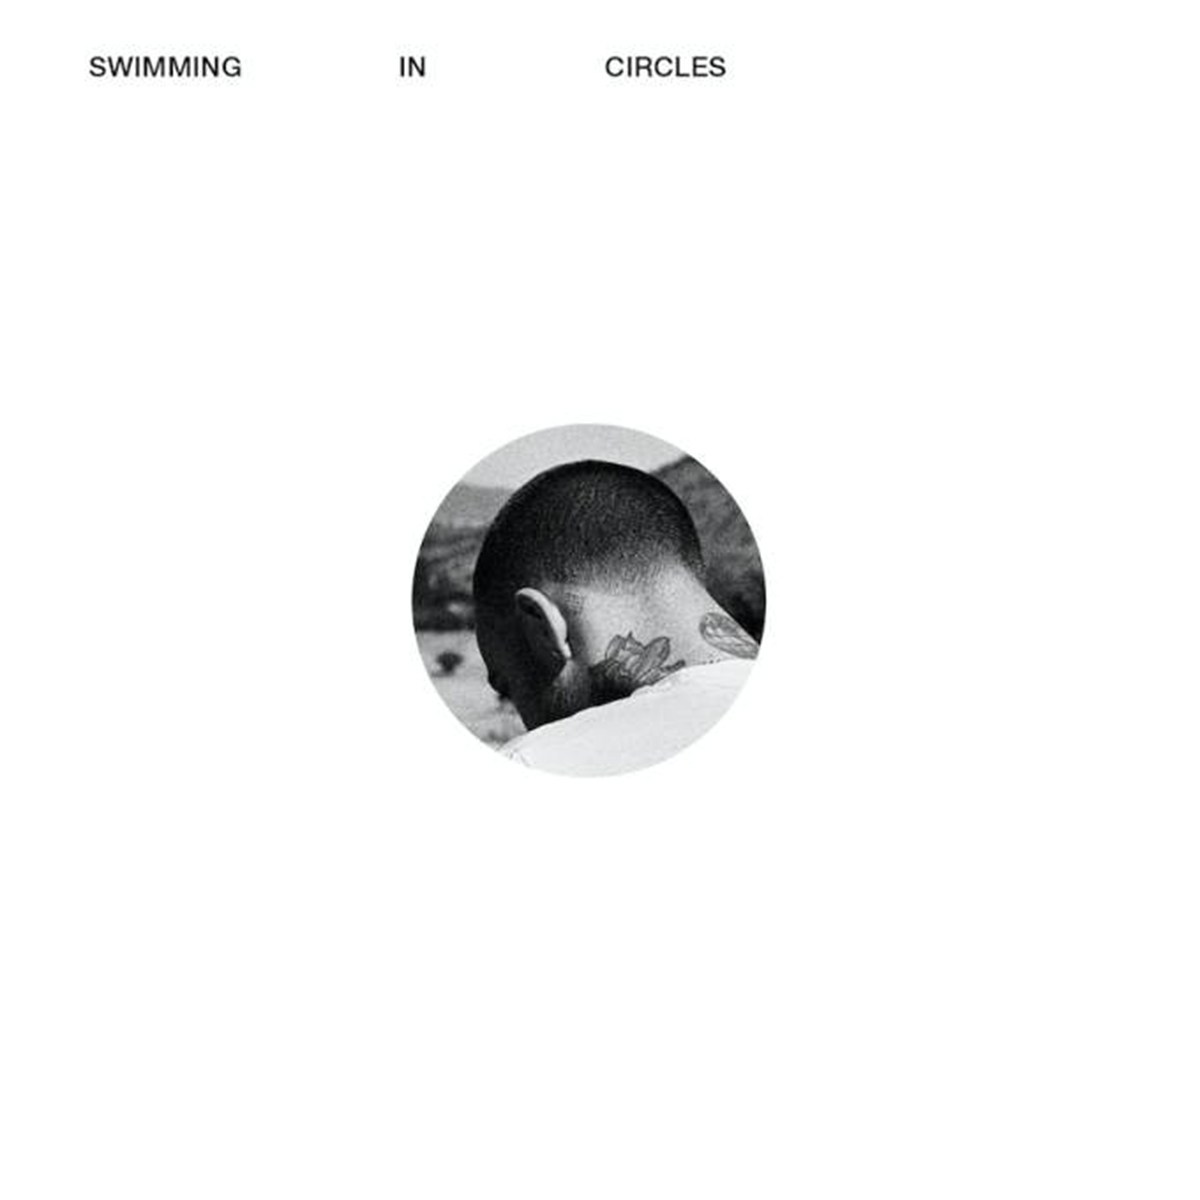 slange hente End Mac Miller's Swimming and Circles collected in new vinyl box set